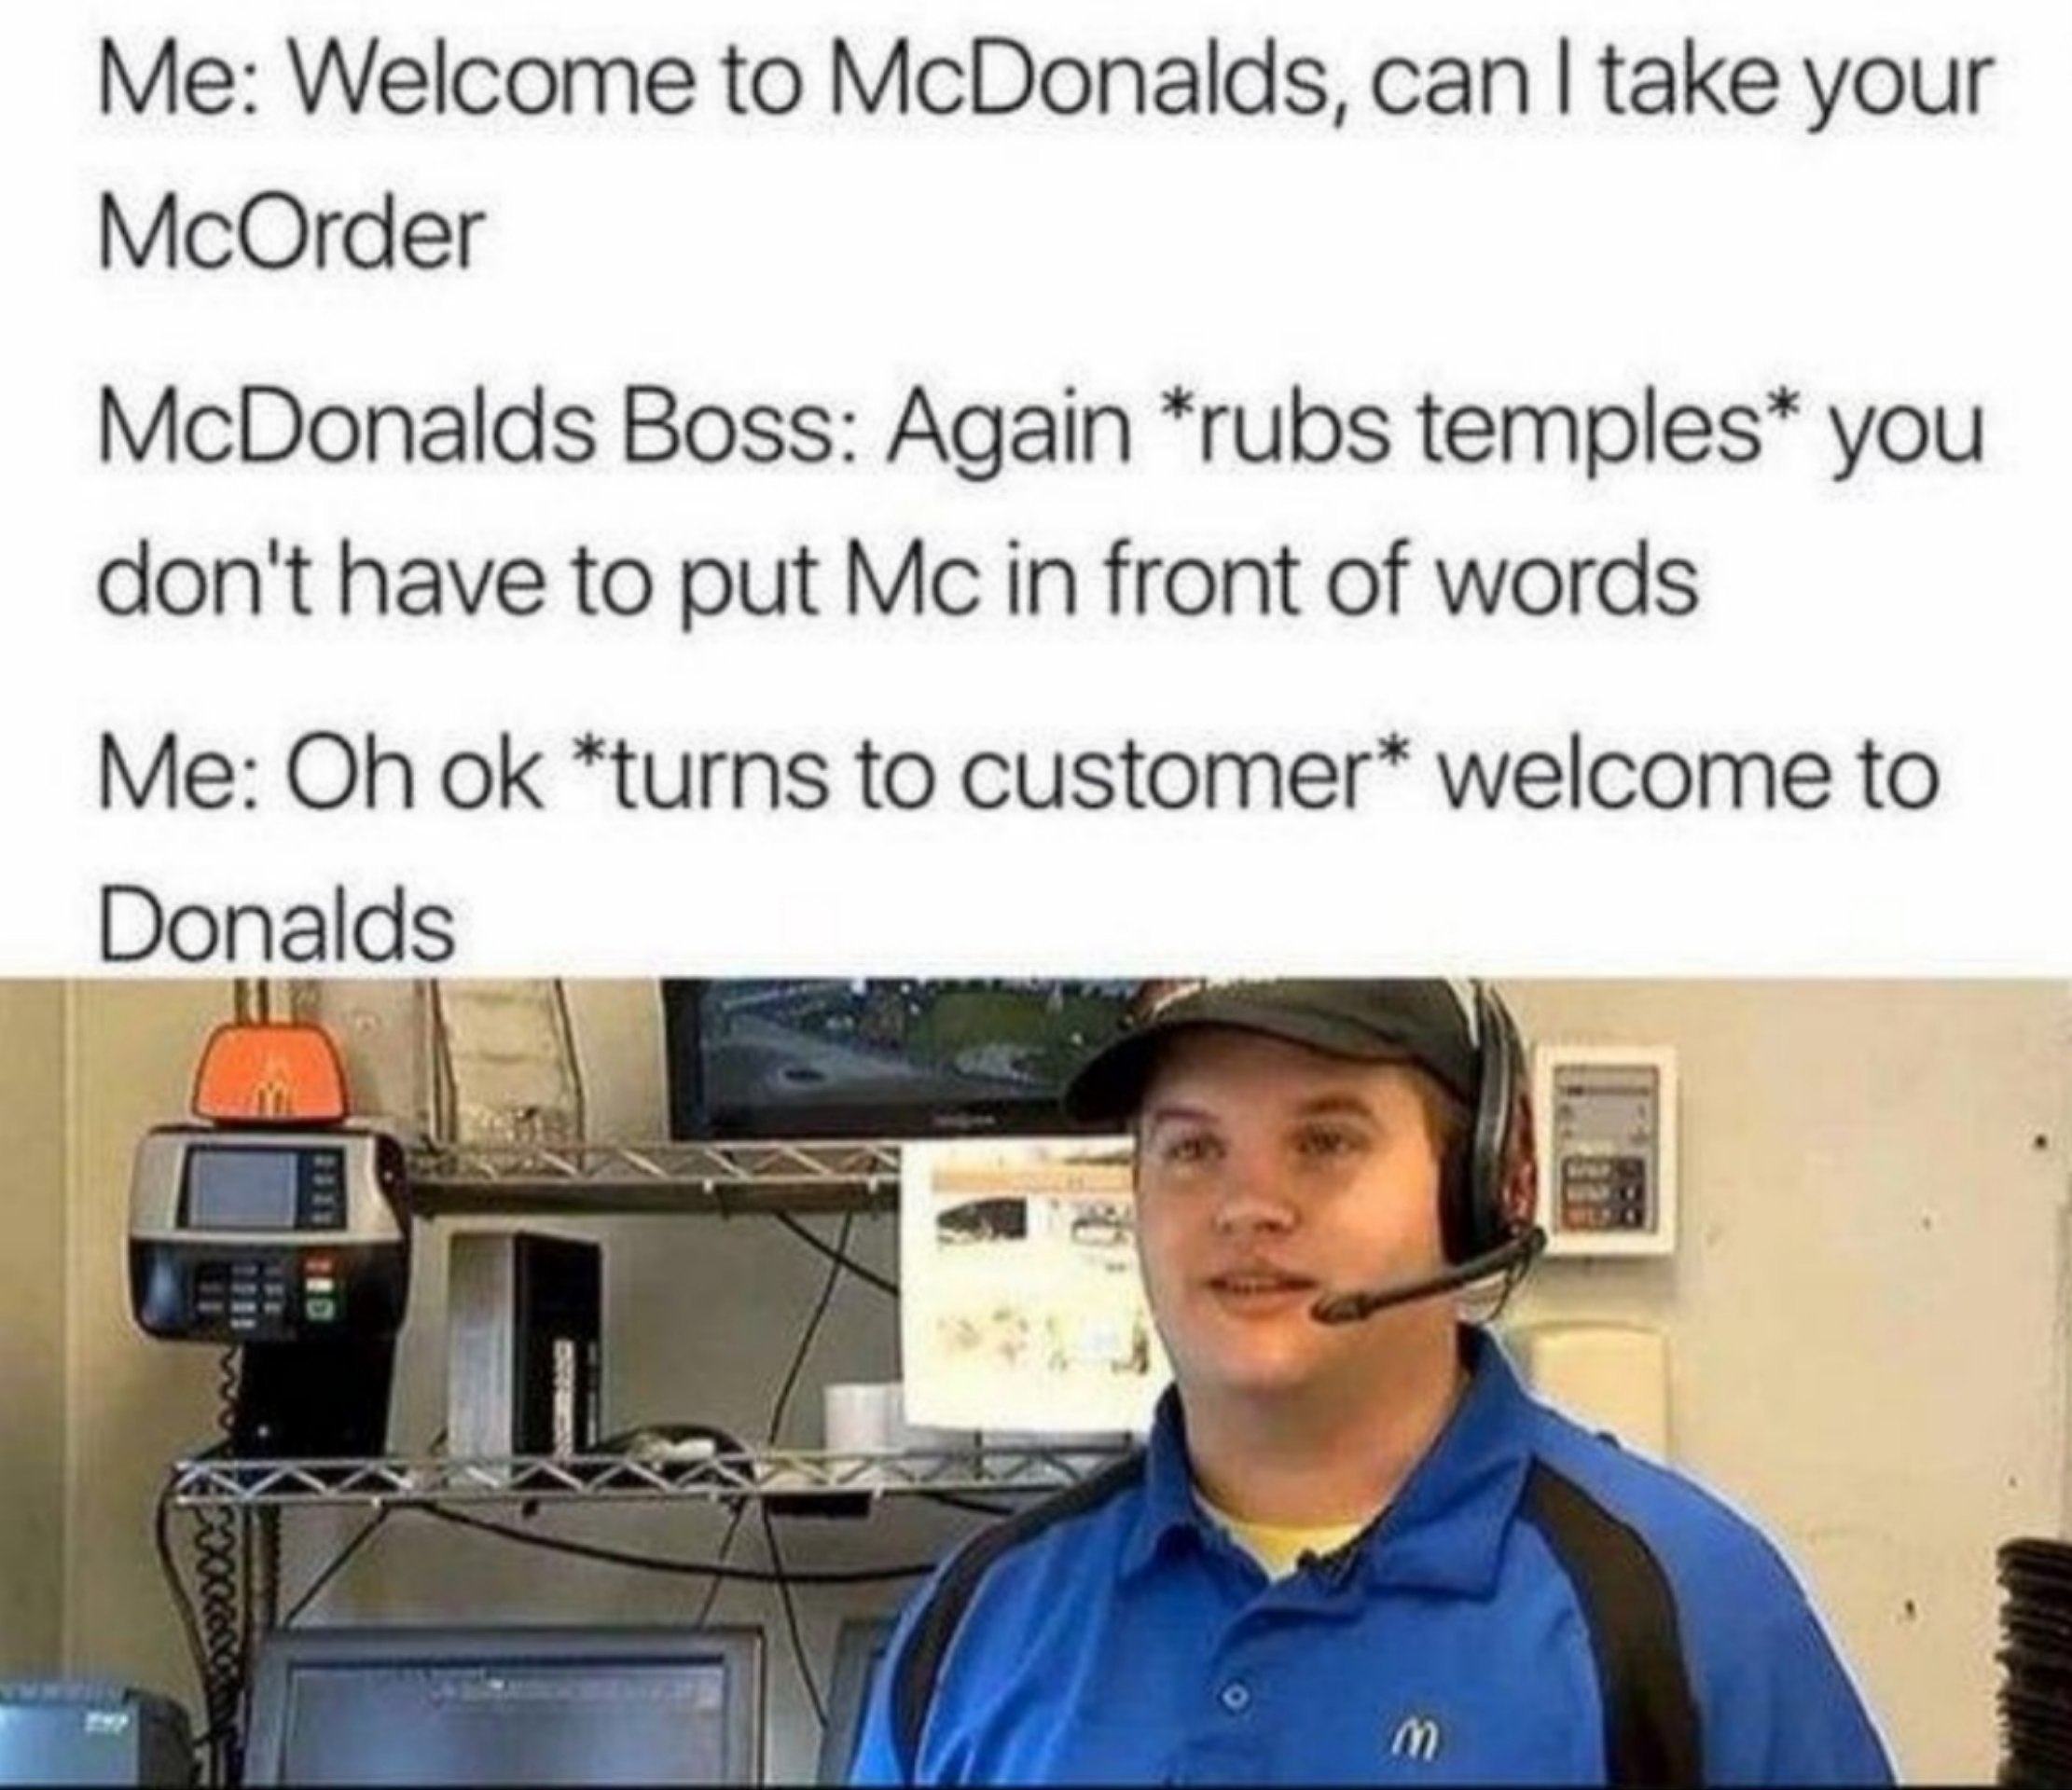 Dank Memes - welcome to mcdonalds can i take your mcorder - Me Welcome to McDonalds, can I take your McOrder McDonalds Boss Again rubs temples you don't have to put Mc in front of words Me Oh ok turns to customer welcome to Donalds